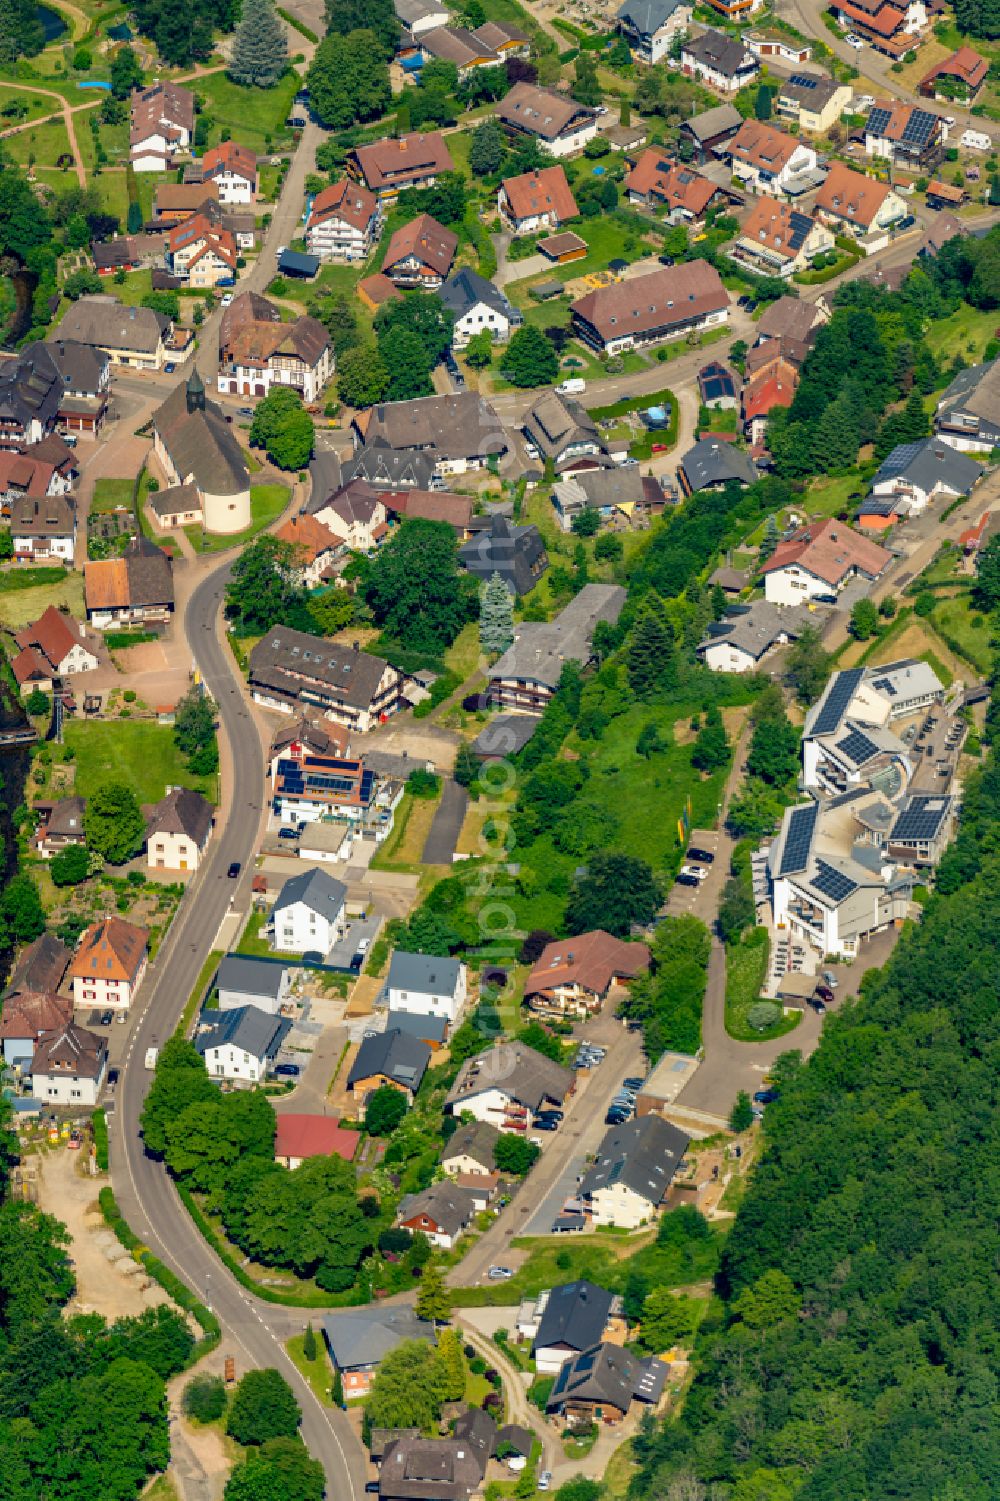 Oberprechtal from above - Location view of the streets and houses of residential areas in the valley landscape surrounded by mountains in Oberprechtal in the state Baden-Wuerttemberg, Germany